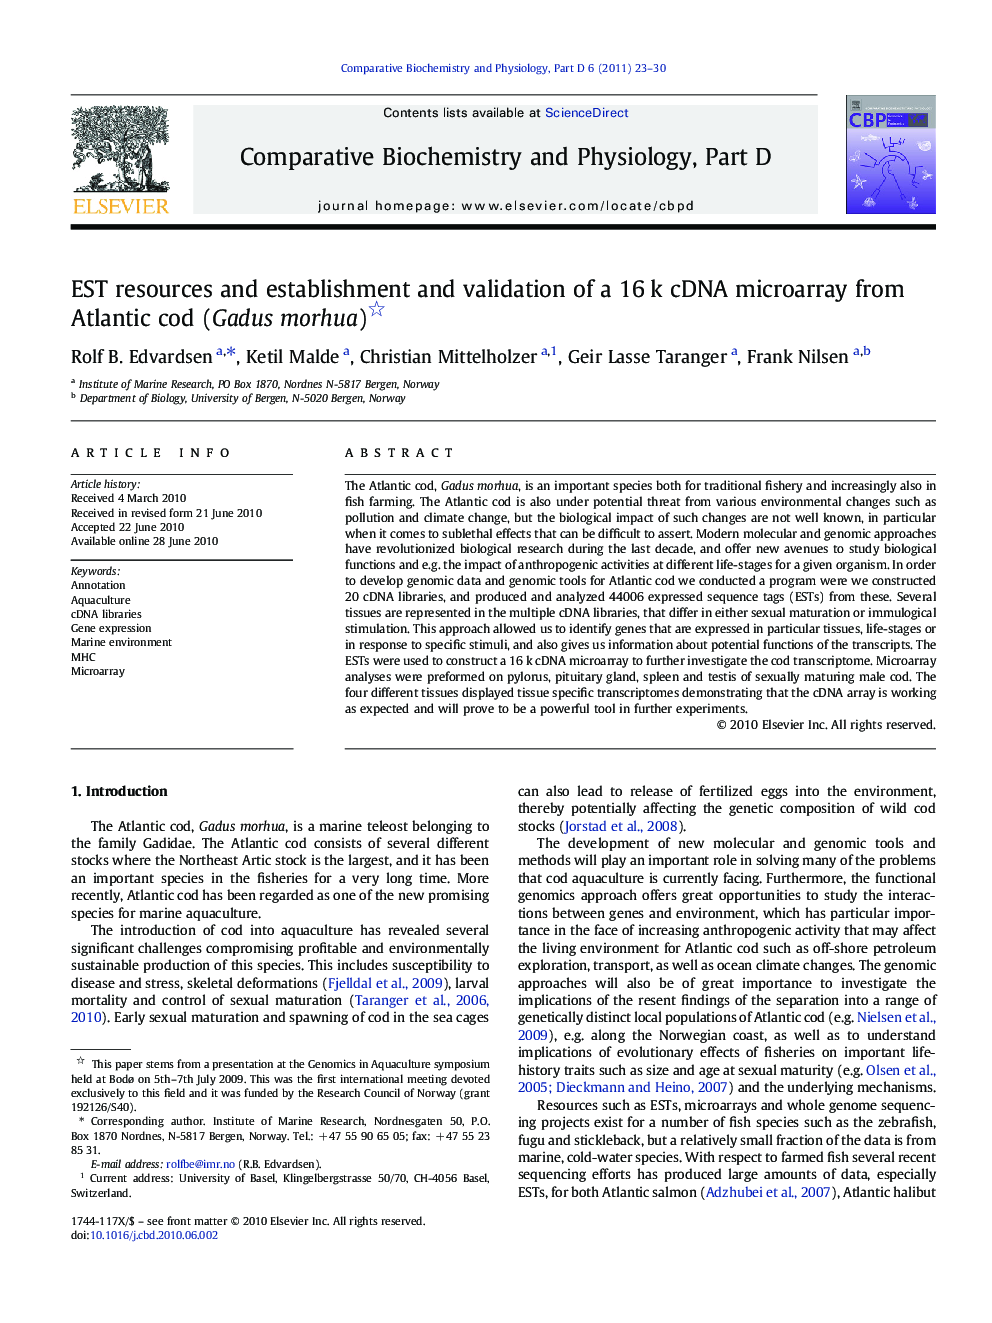 EST resources and establishment and validation of a 16Â k cDNA microarray from Atlantic cod (Gadus morhua)